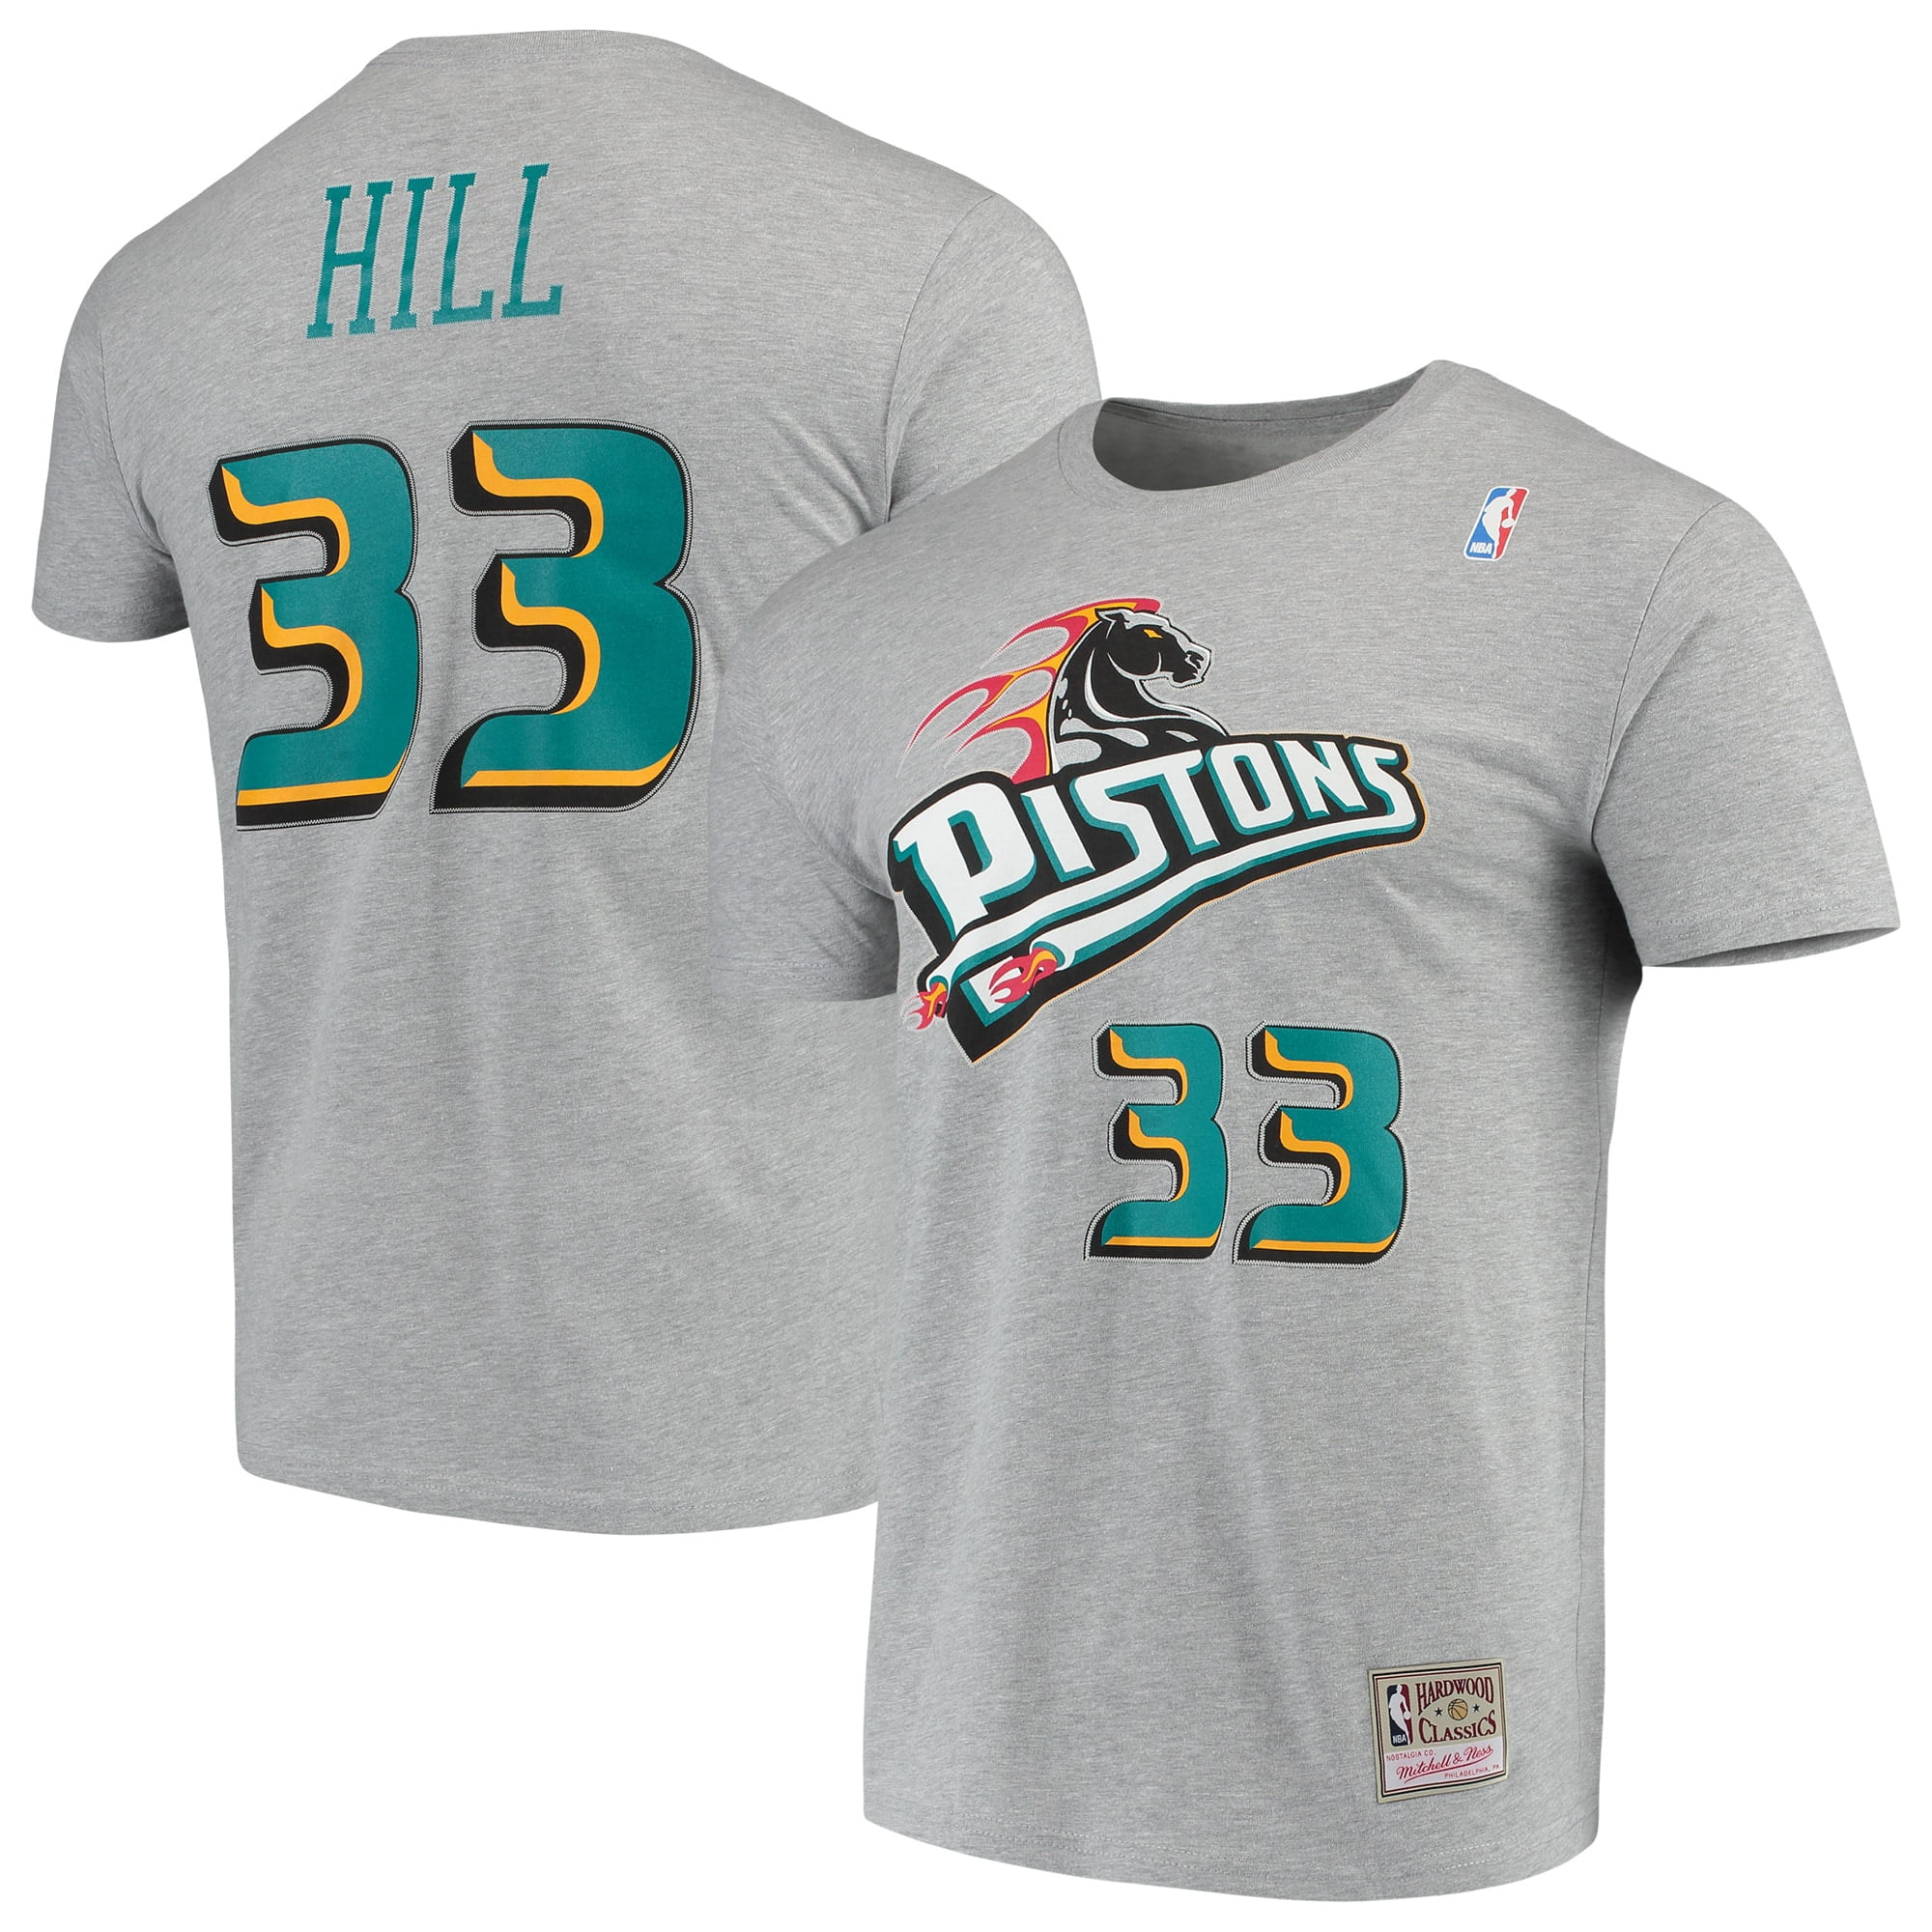 grant hill mitchell and ness